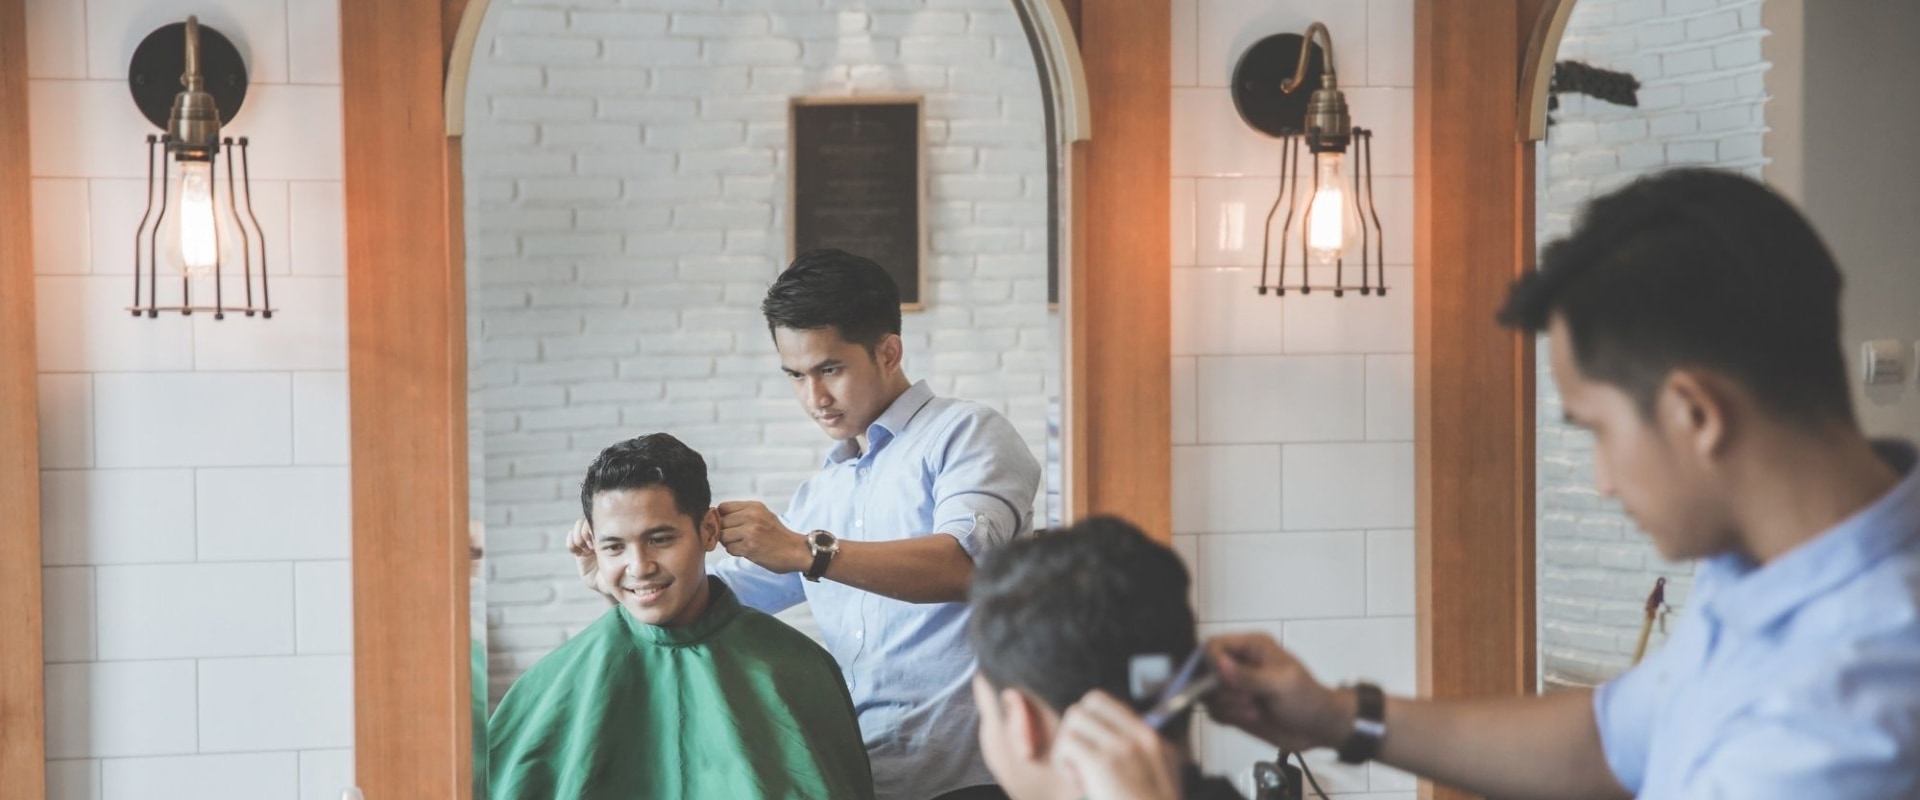 Everything You Need to Know About Men's Grooming Services